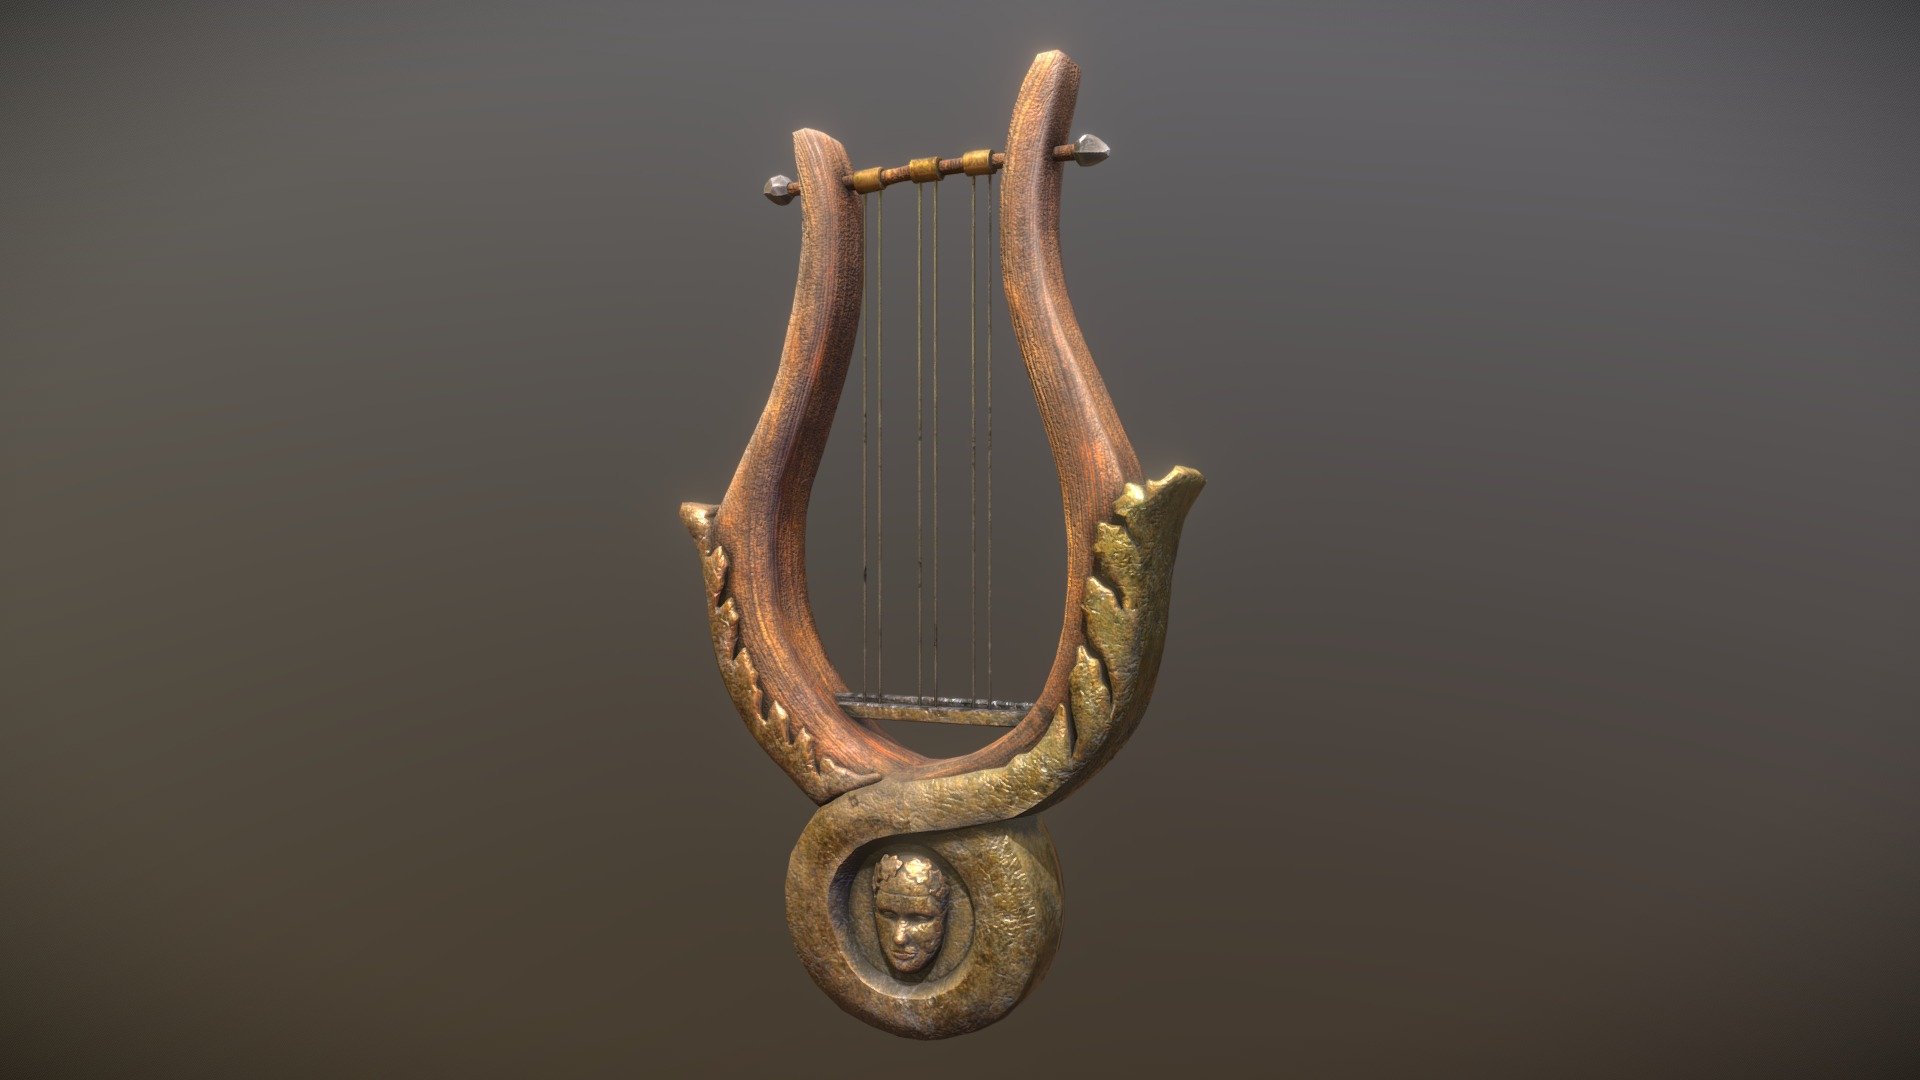 Lyre of Ancient Greece